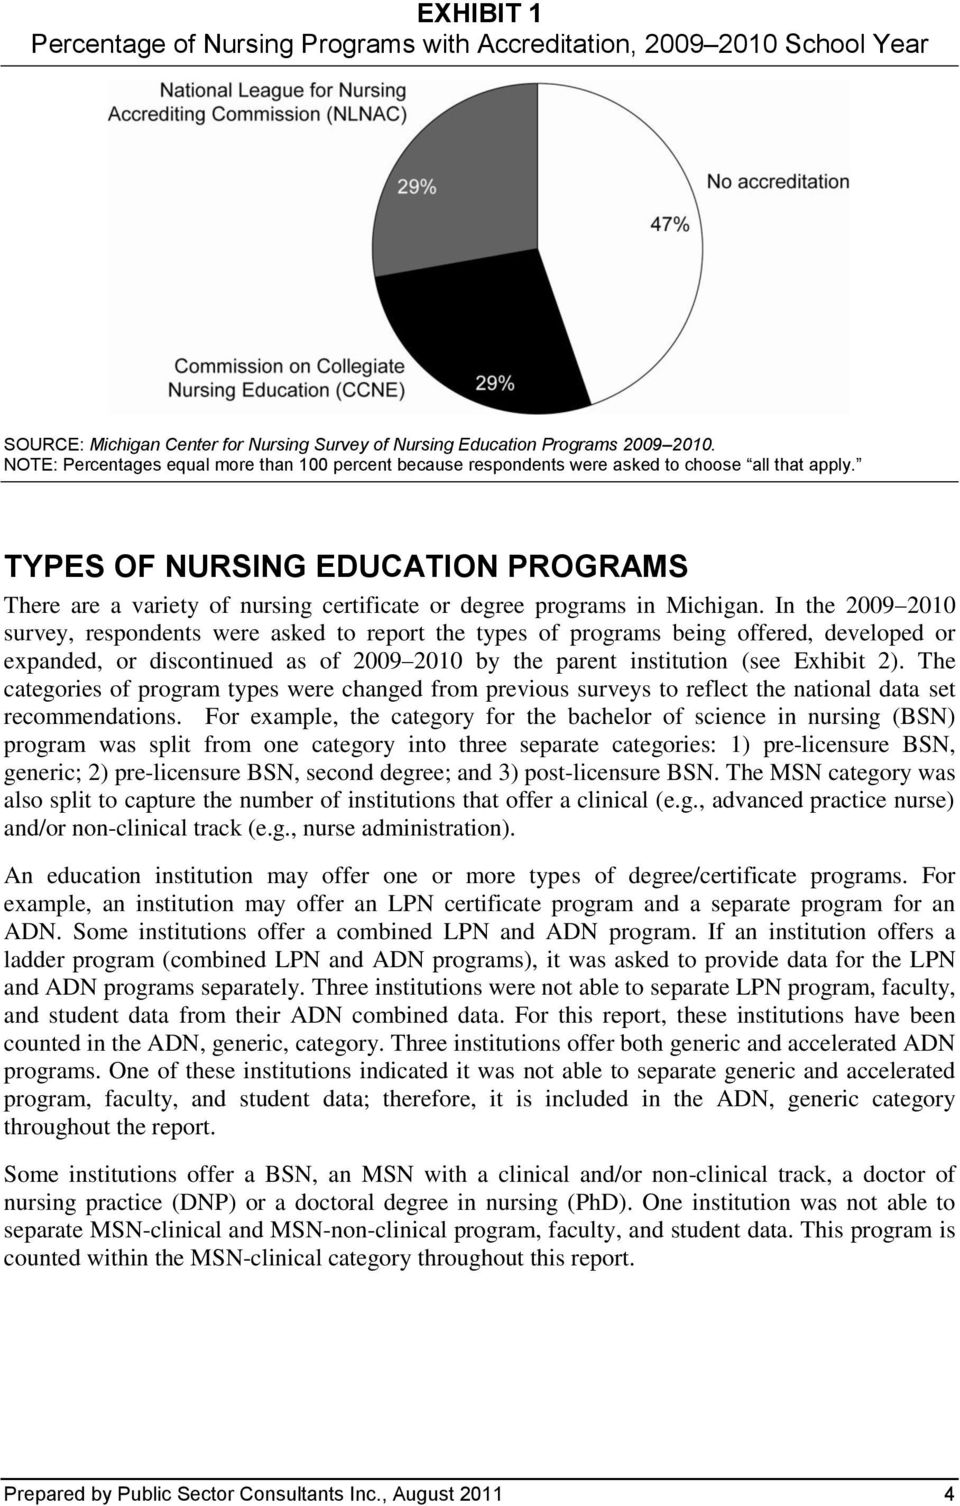 TYPES OF NURSING EDUCATION PROGRAMS There are a variety of nursing certificate or degree programs in Michigan.